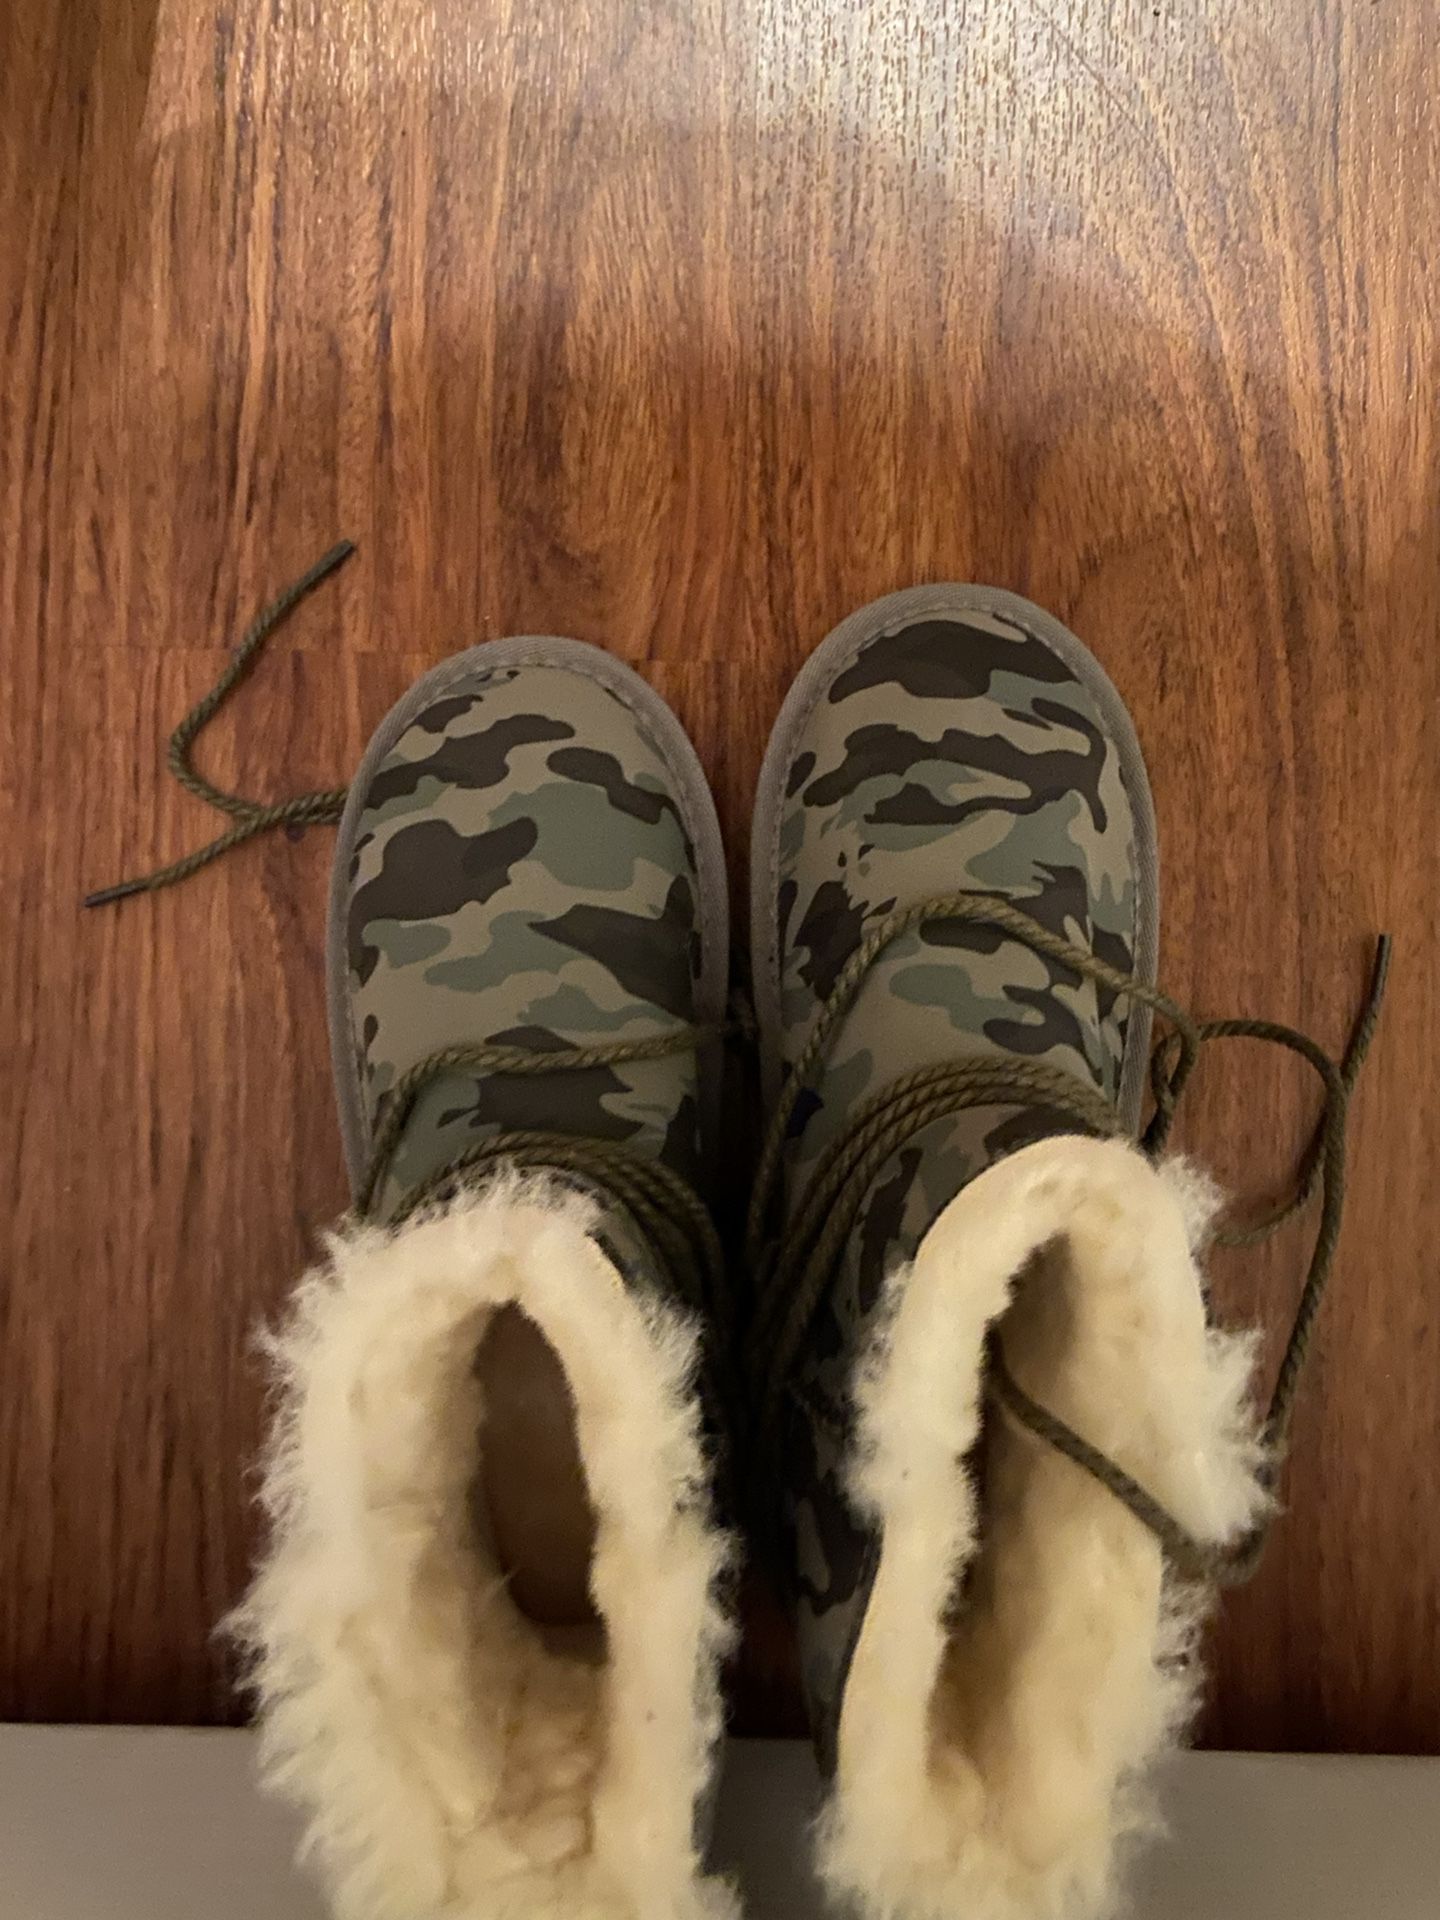 Size 38, Army Fatigue Boots with Fur Insides. Boutique Closeout Sale 